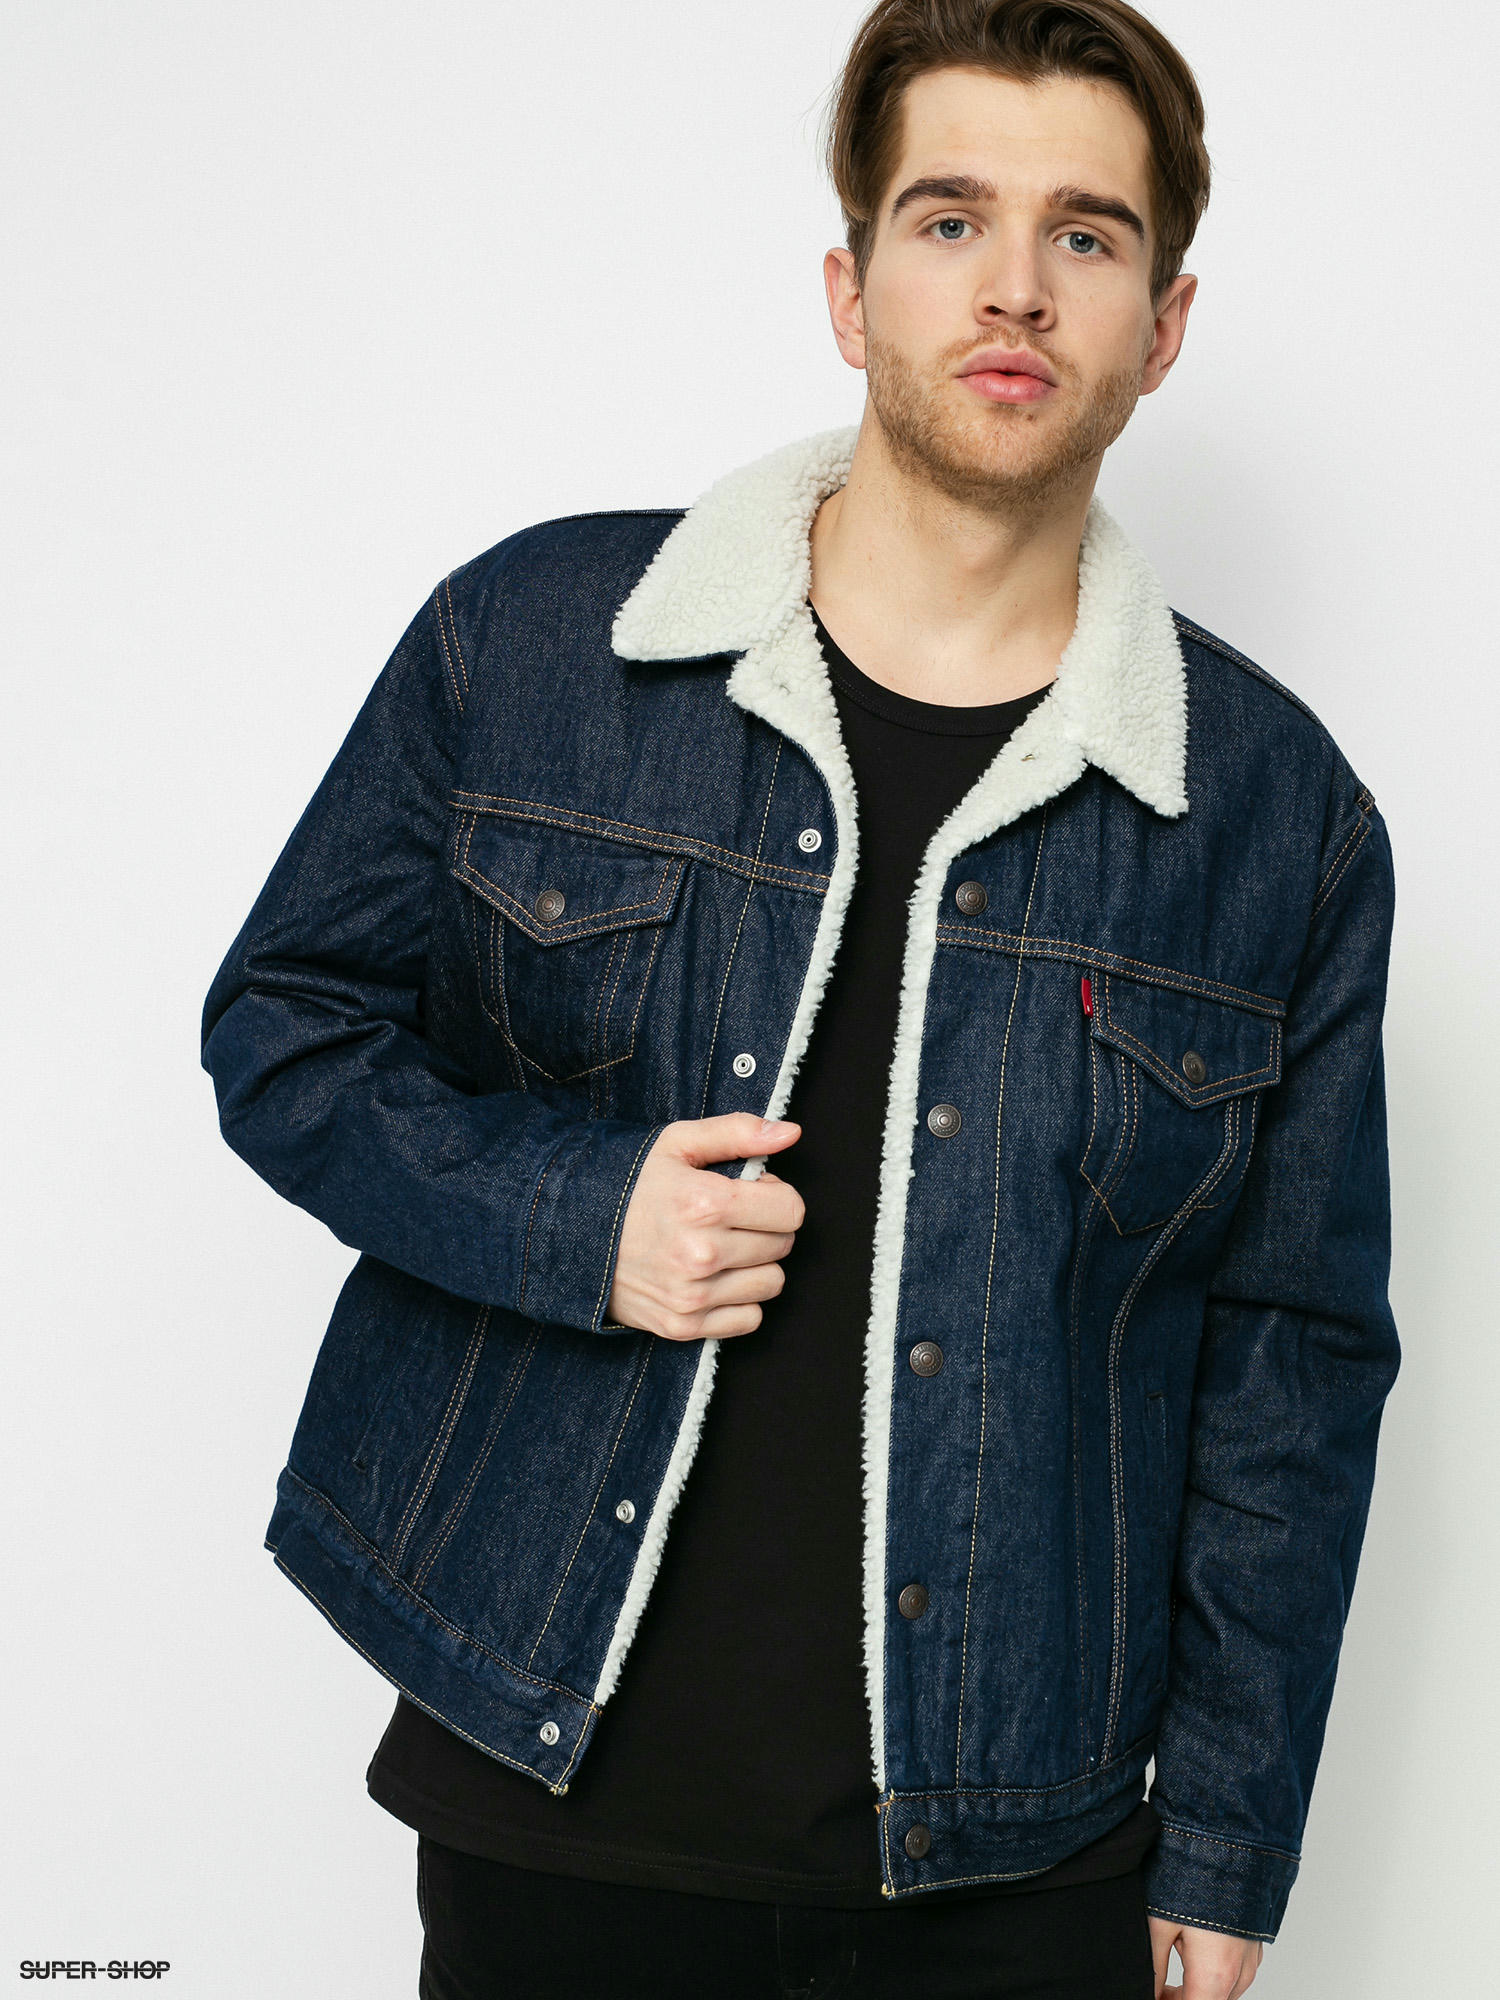 Vintage Levi's Sherpa Lined Denim Jacket | Urban Outfitters